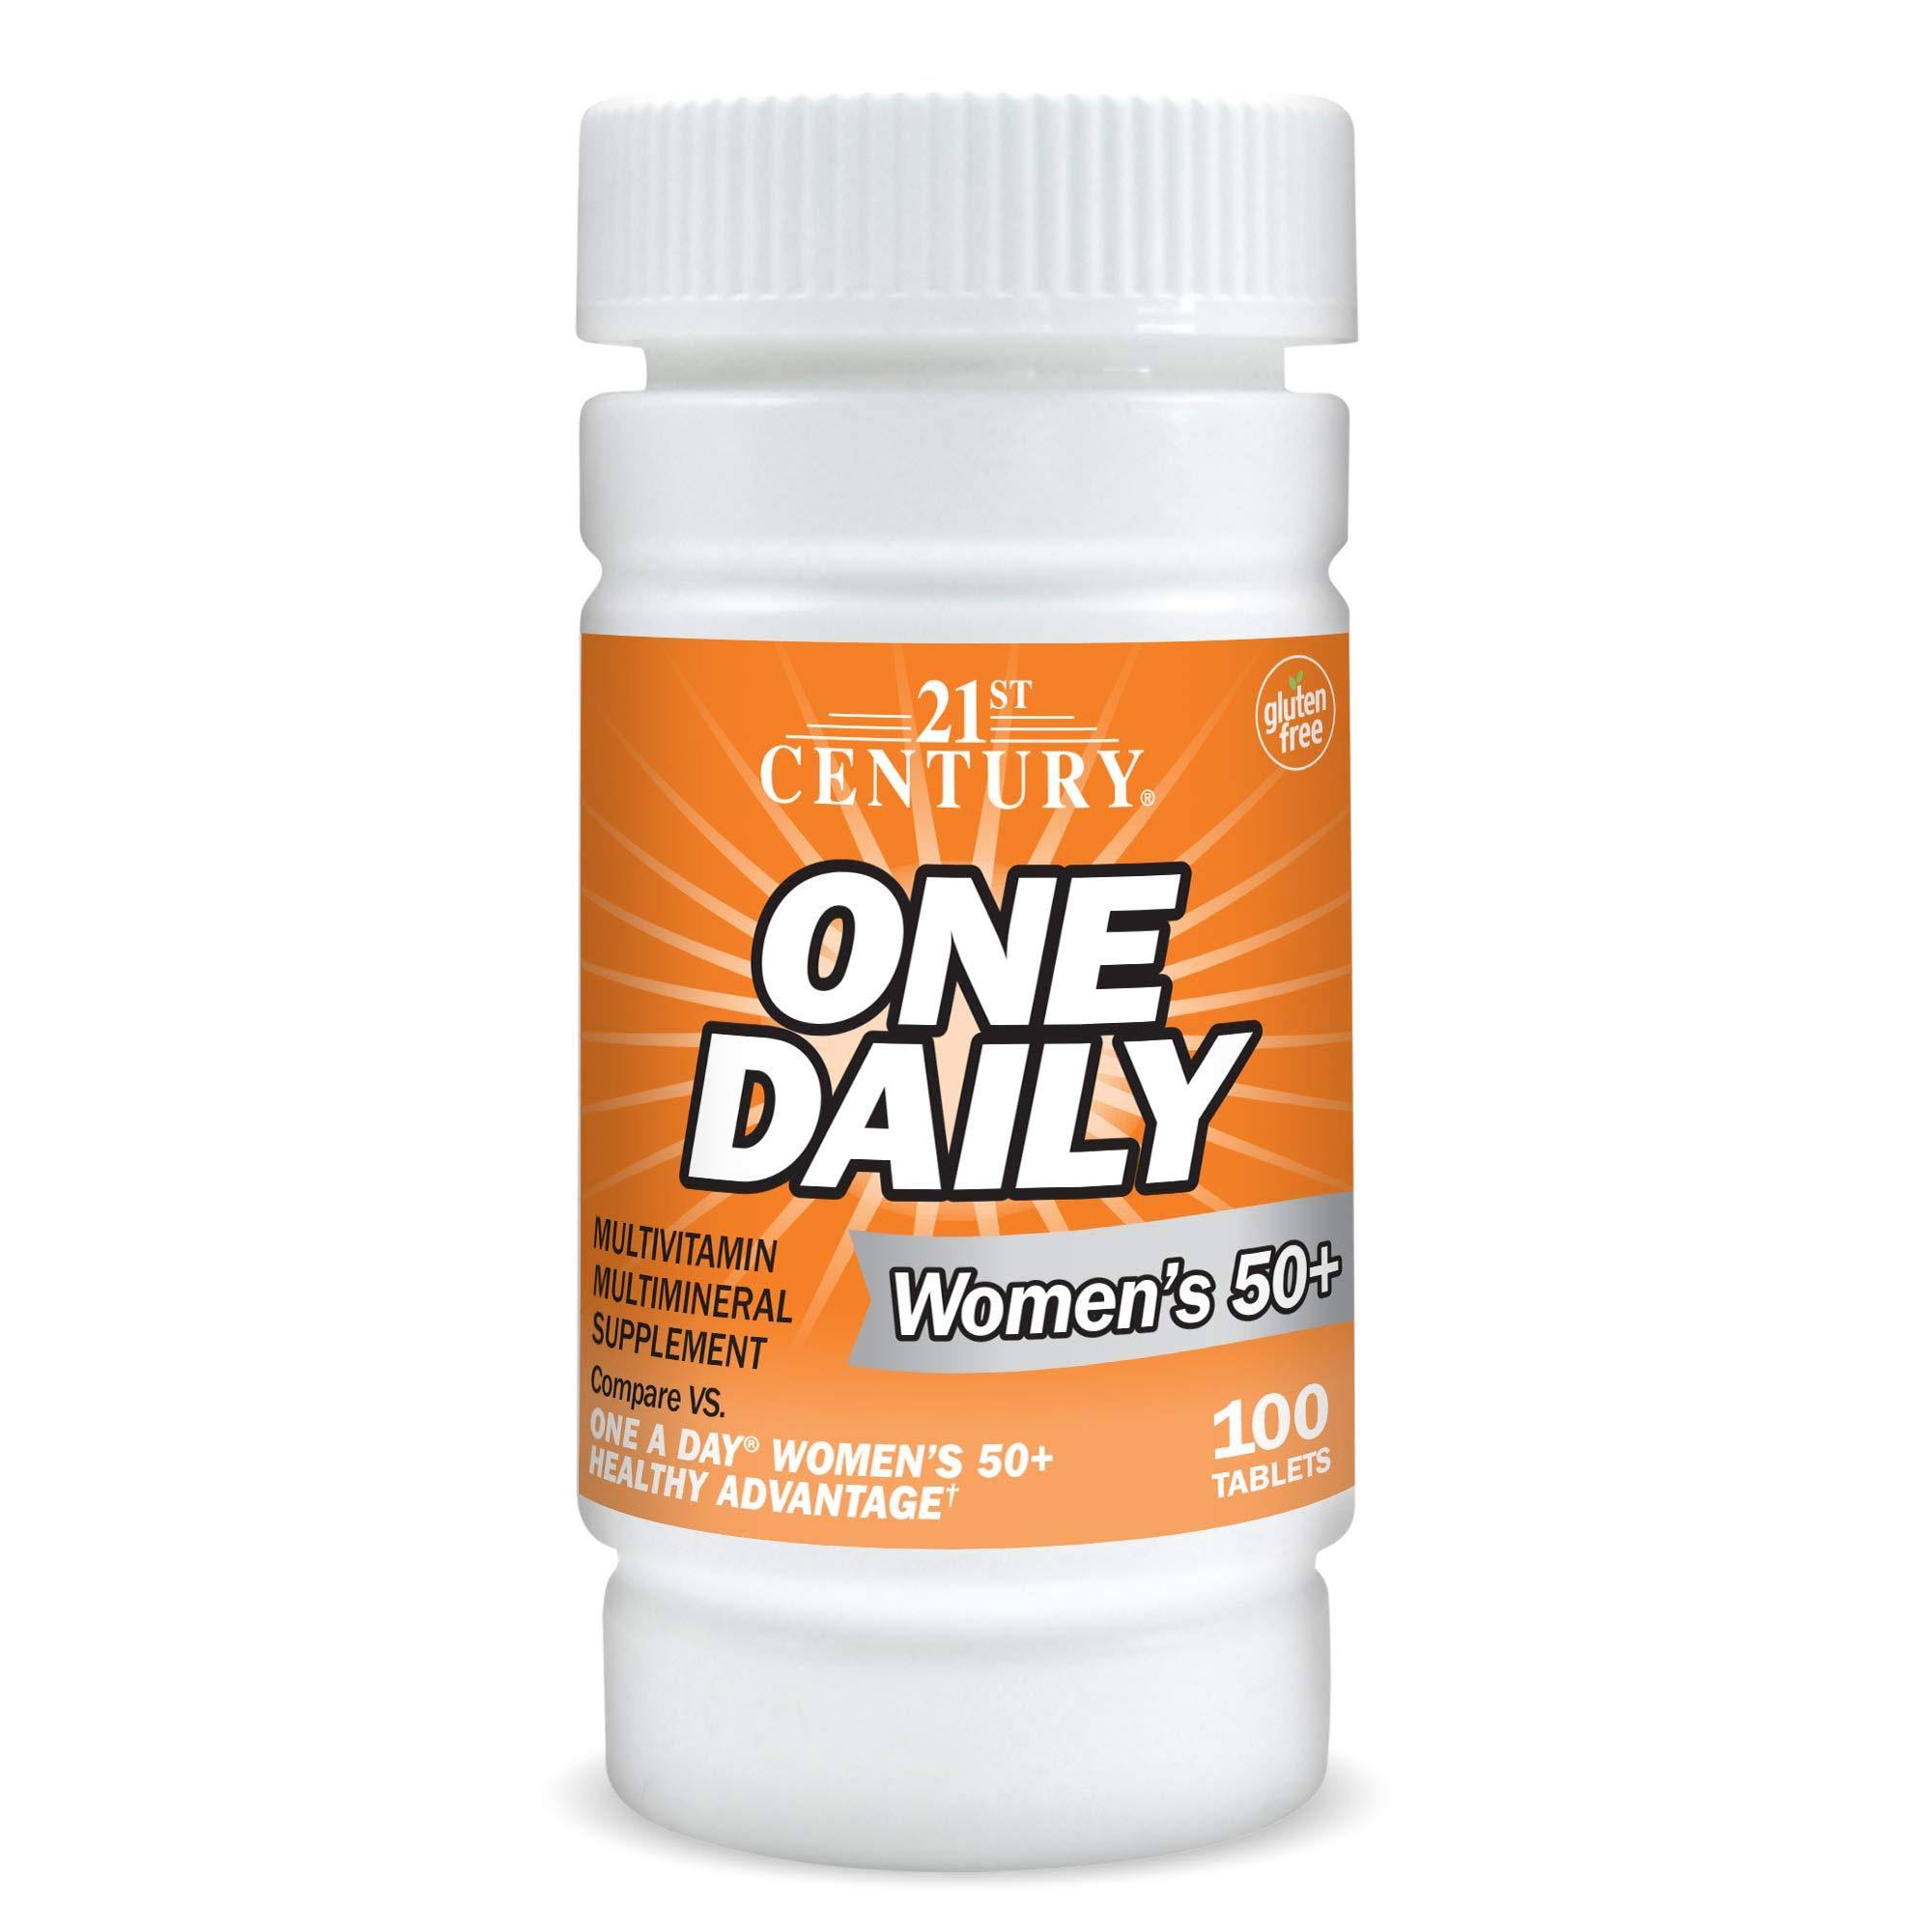 21st Century One Daily Women's 50+ Dietary Supplement - 100 Tablets